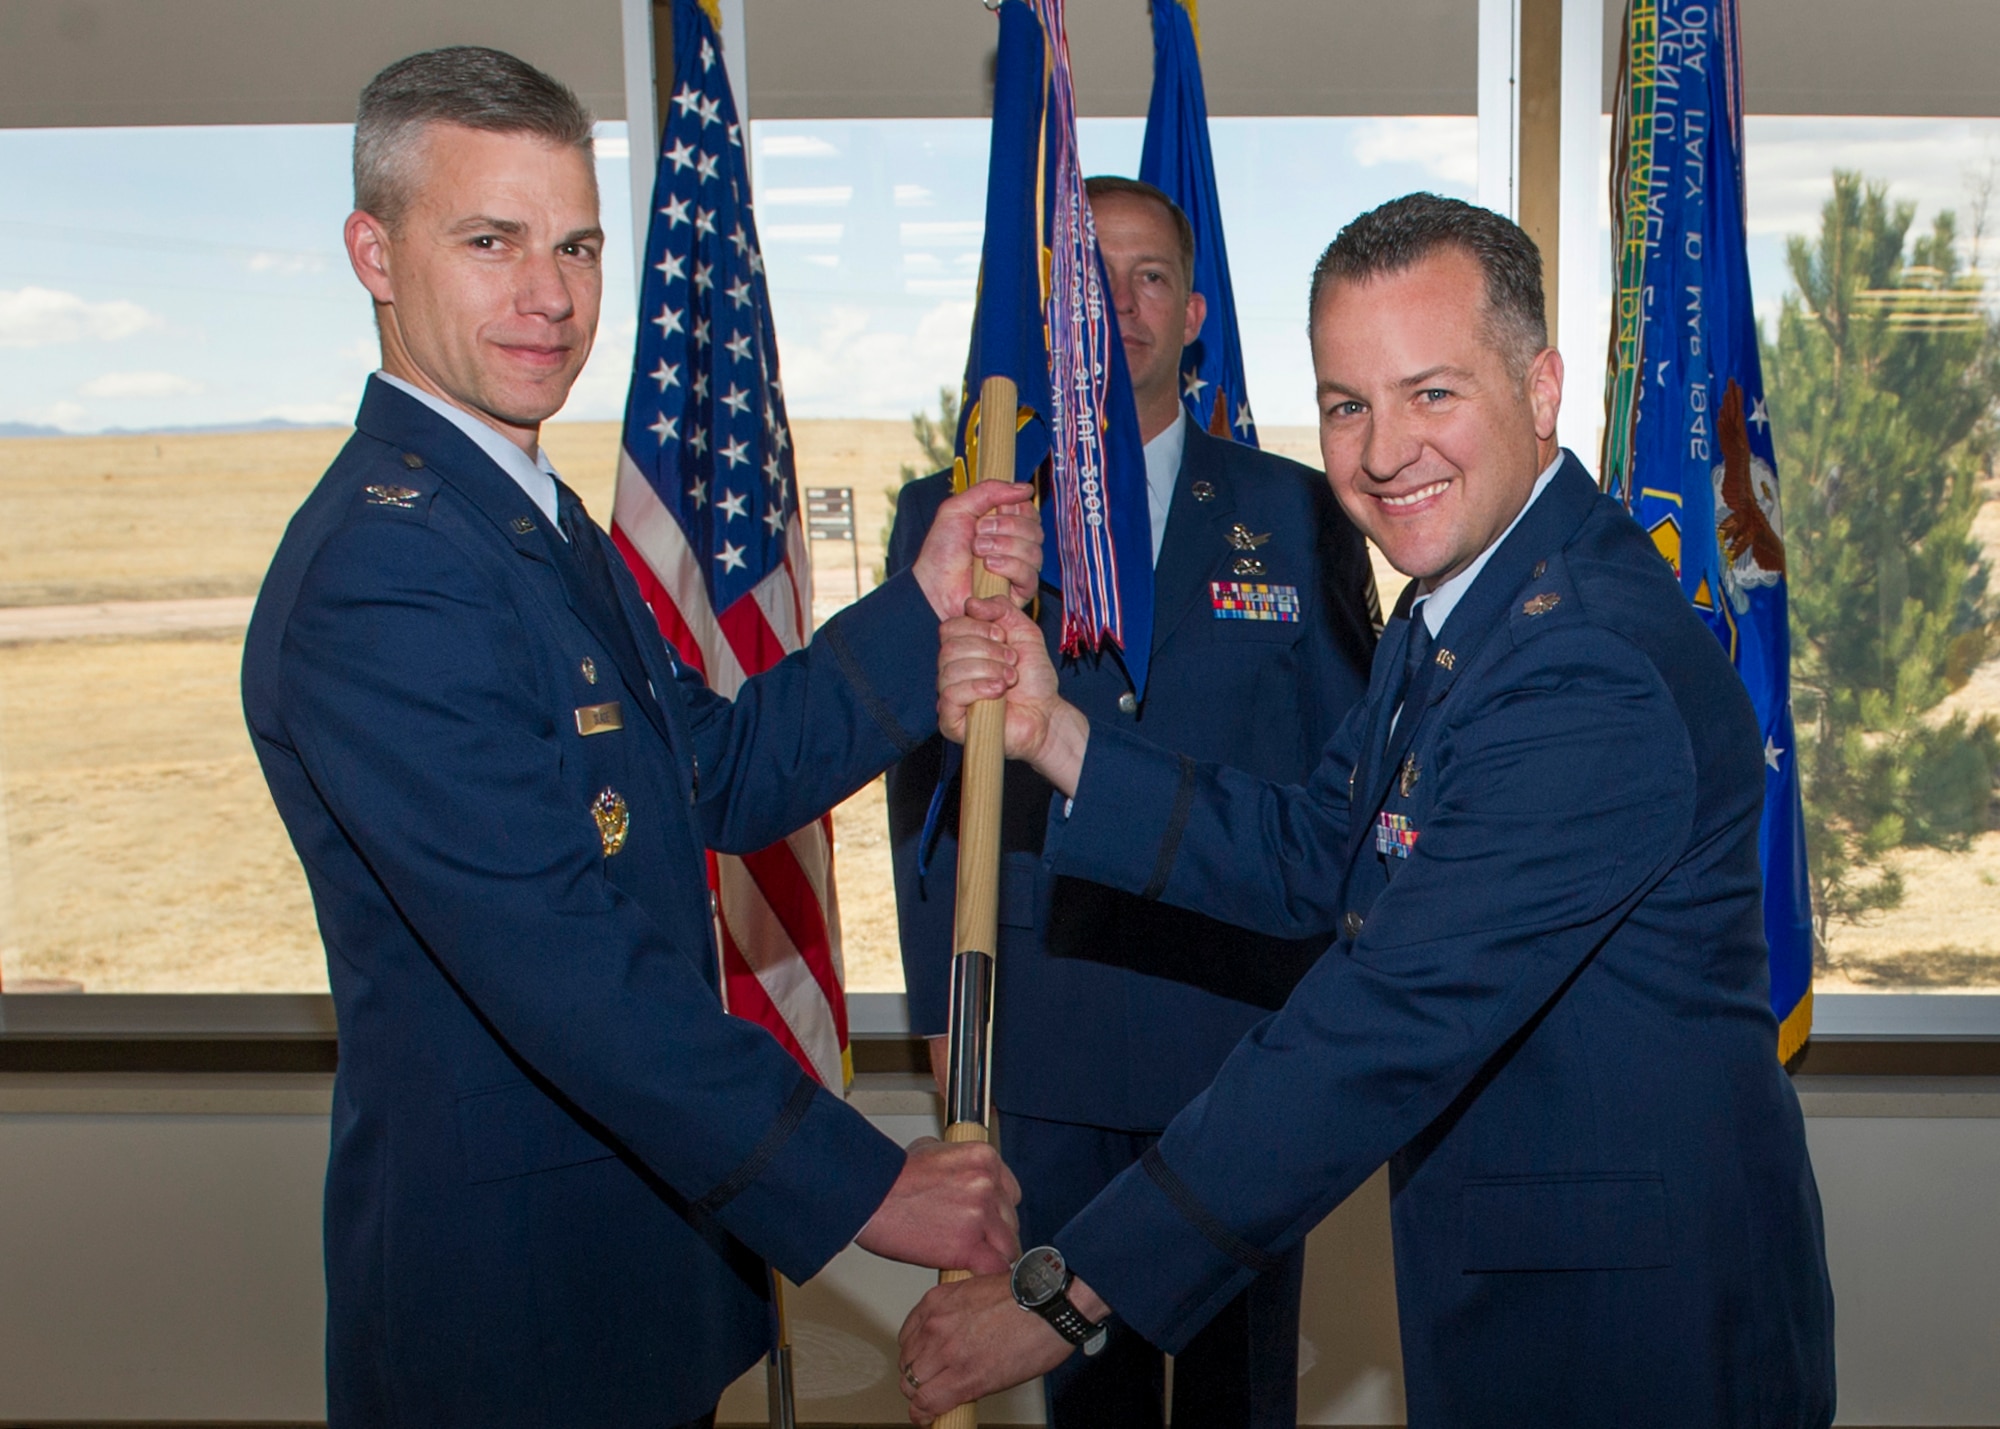 Lieutenant Col. James Hogan accepts the 7th Space Operations Squadron guidon from Col. Stephen Spade, 310th Operations Group commander, as he assumes command during the change of command ceremony on Sunday, Apr. 8th, 2018.